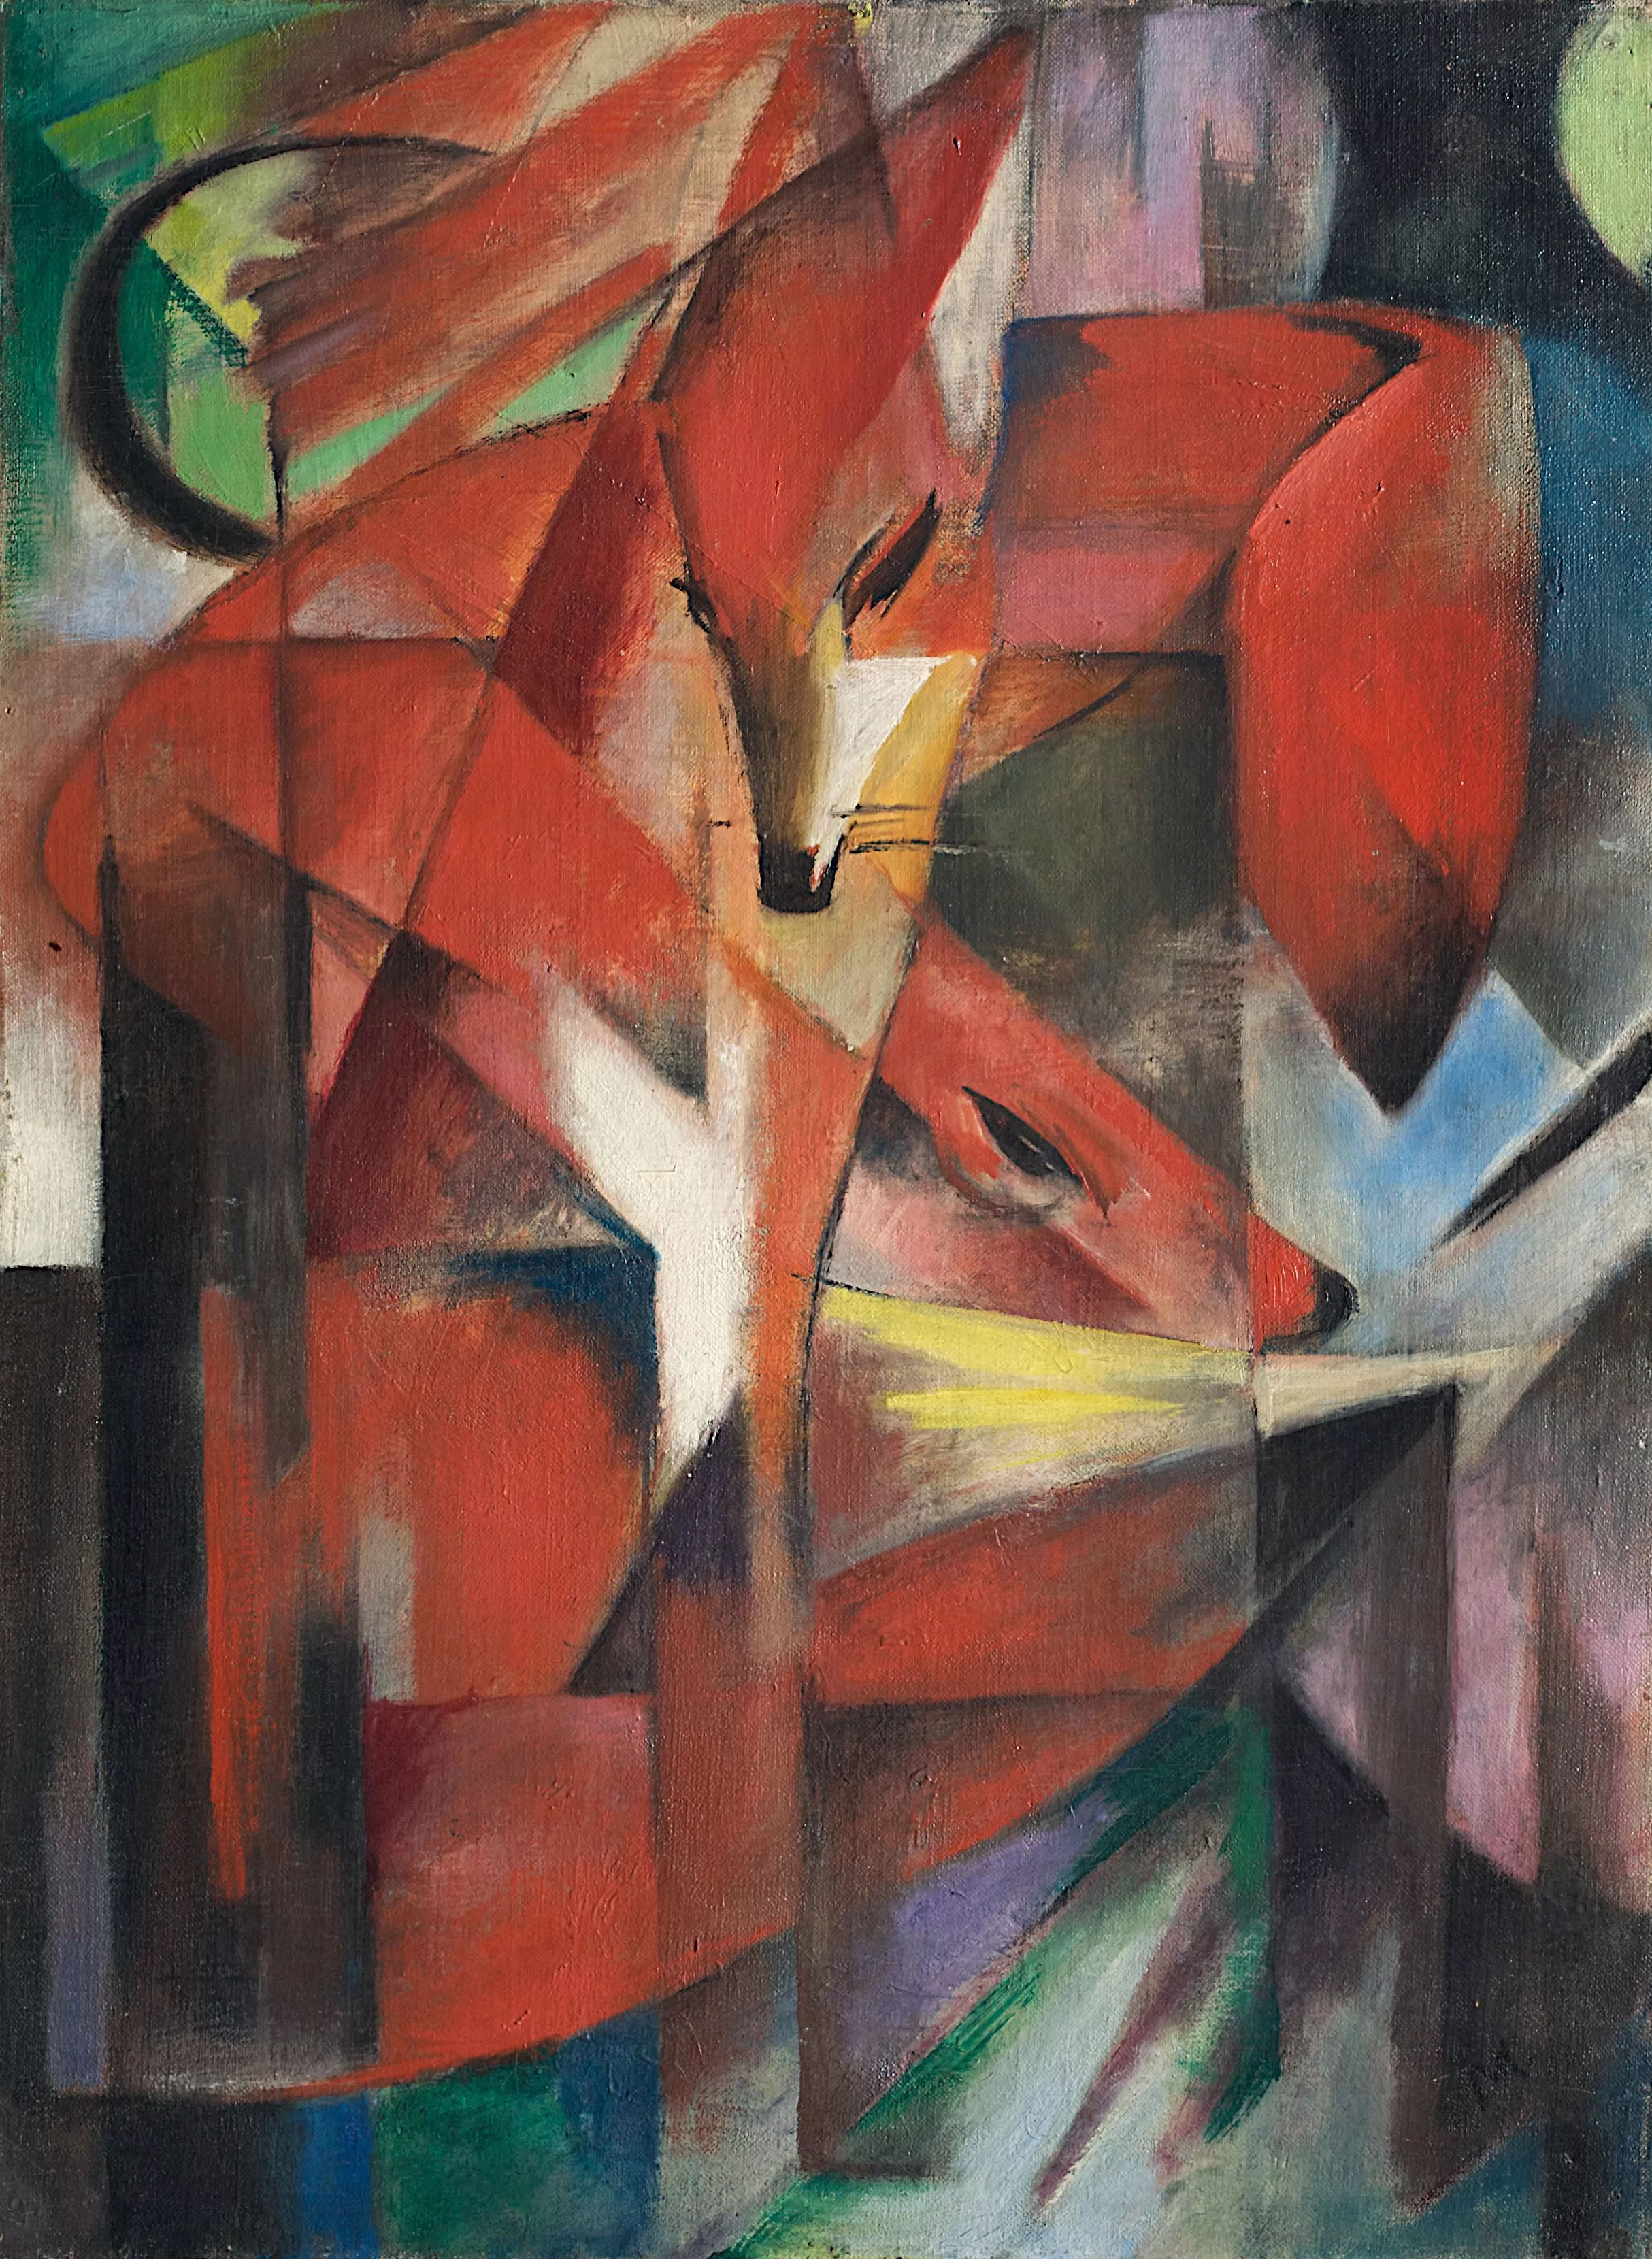 The Foxes, Franz Marc